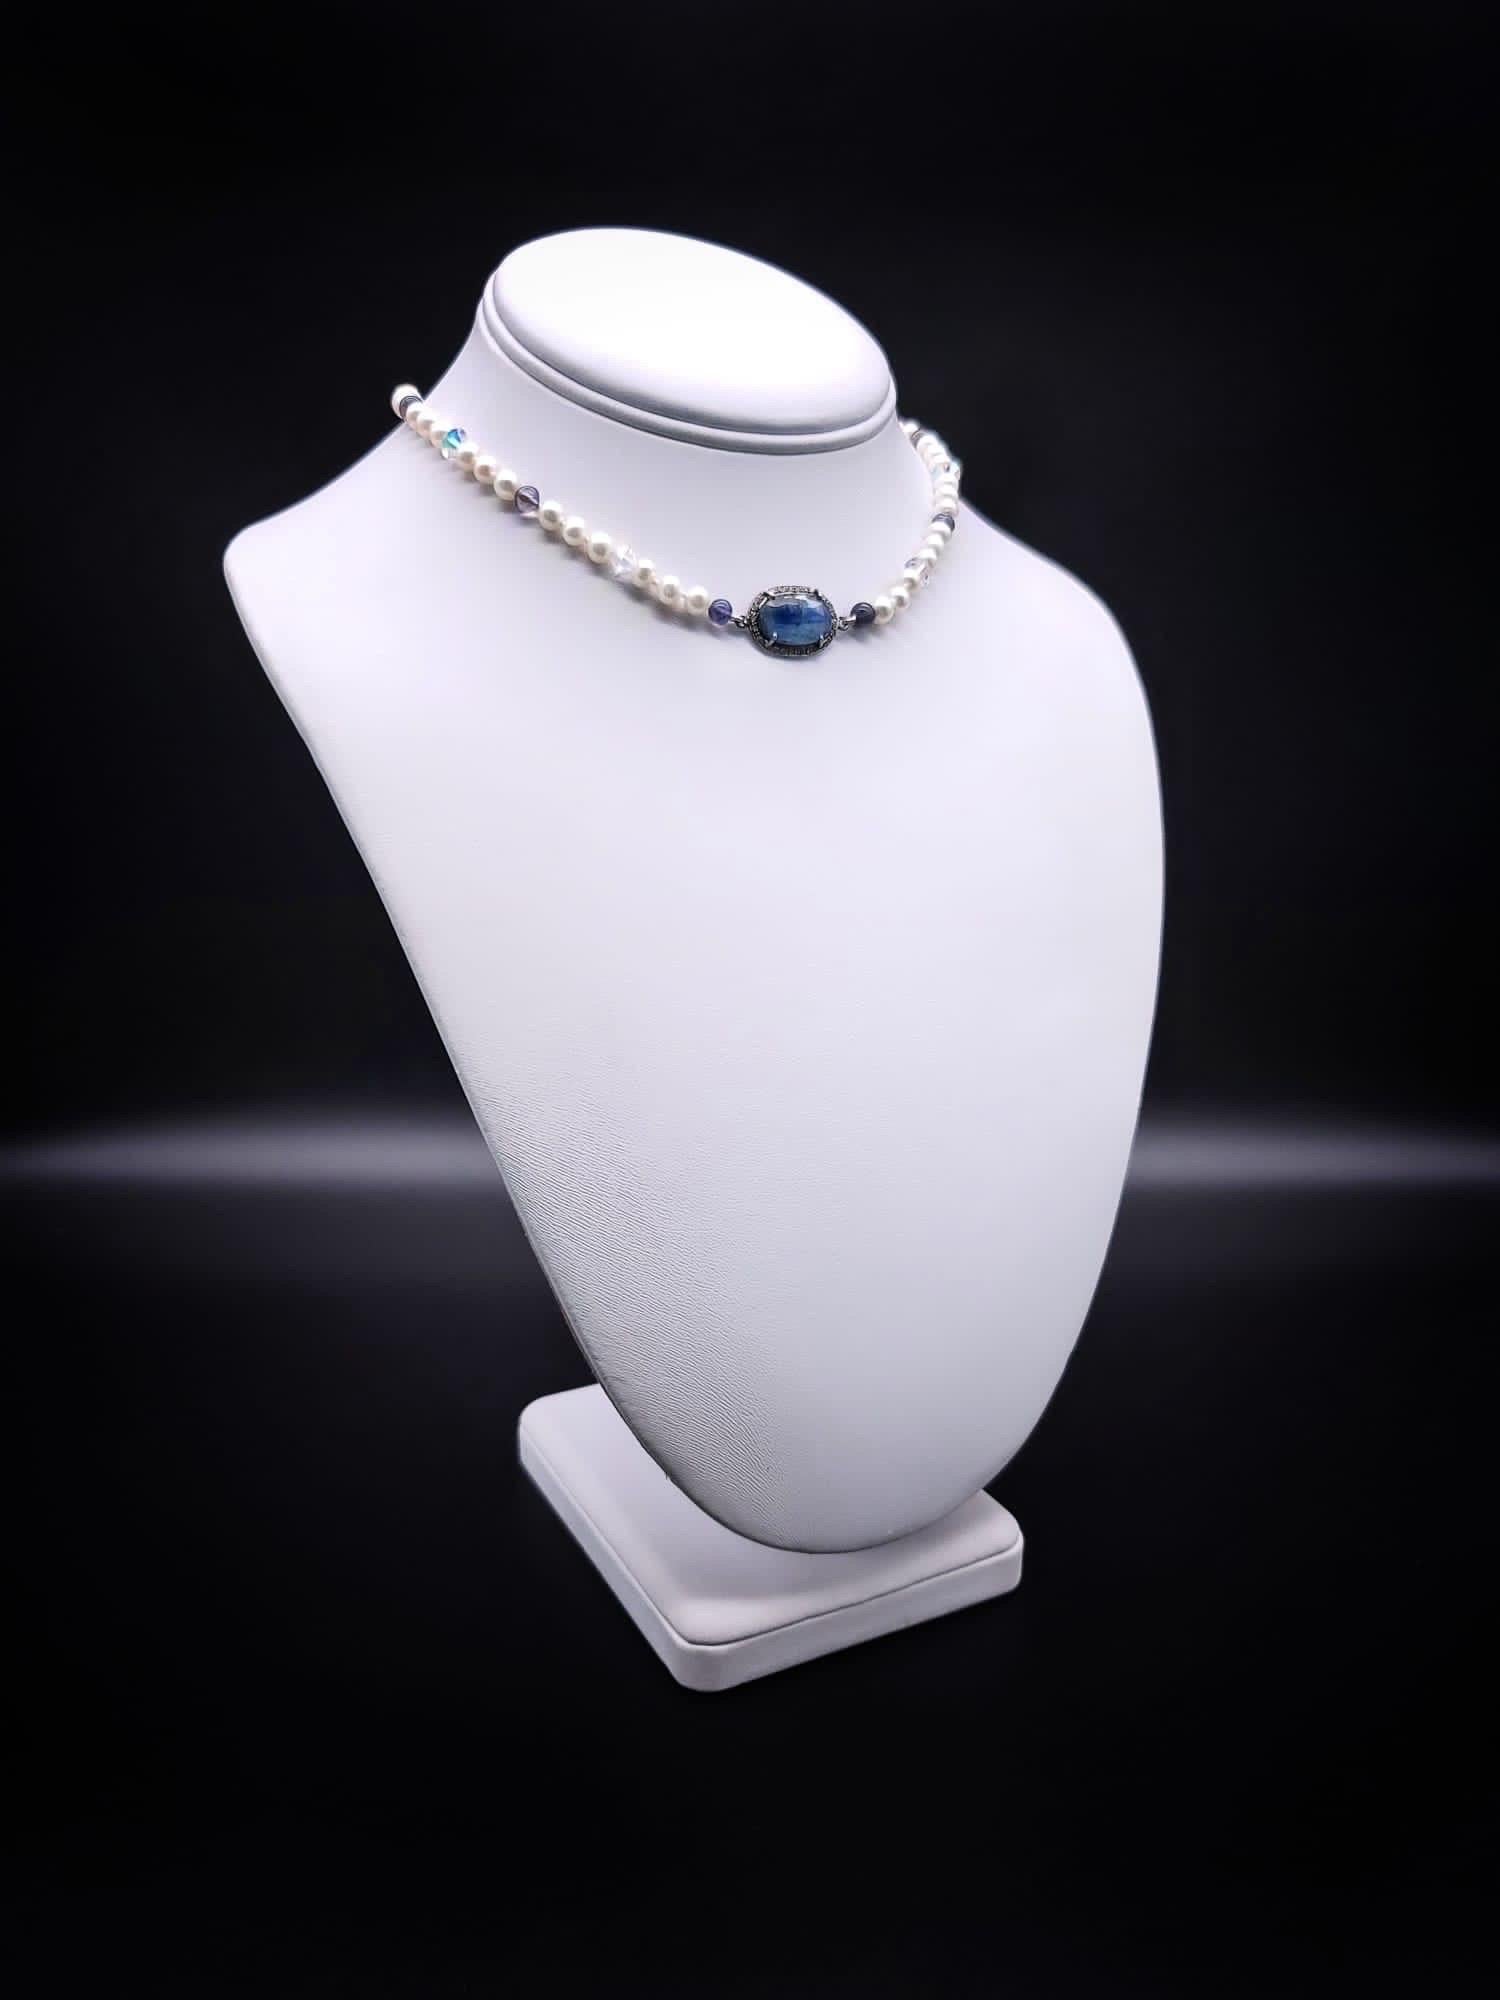 One-of-a-Kind

The delicate sapphire and pearl 14” choker is designed so that the diamond and faceted sapphire centerpiece sits in the curve at the base of the throat. The sterling silver clasp is enhanced with a matching pearl.

Sapphire is